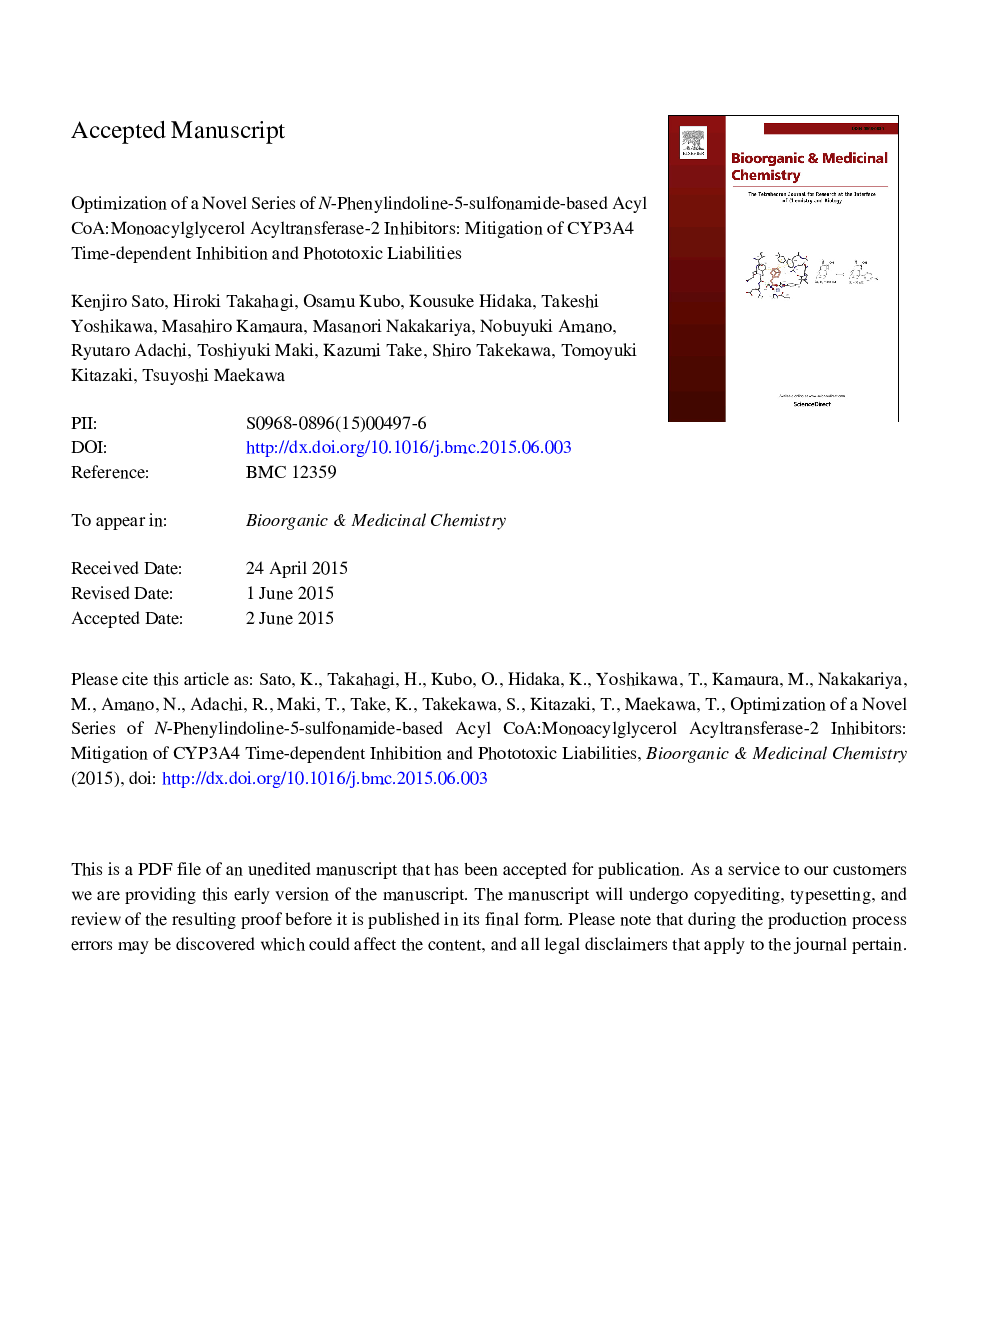 Optimization of a novel series of N-phenylindoline-5-sulfonamide-based acyl CoA:monoacylglycerol acyltransferase-2 inhibitors: Mitigation of CYP3A4 time-dependent inhibition and phototoxic liabilities